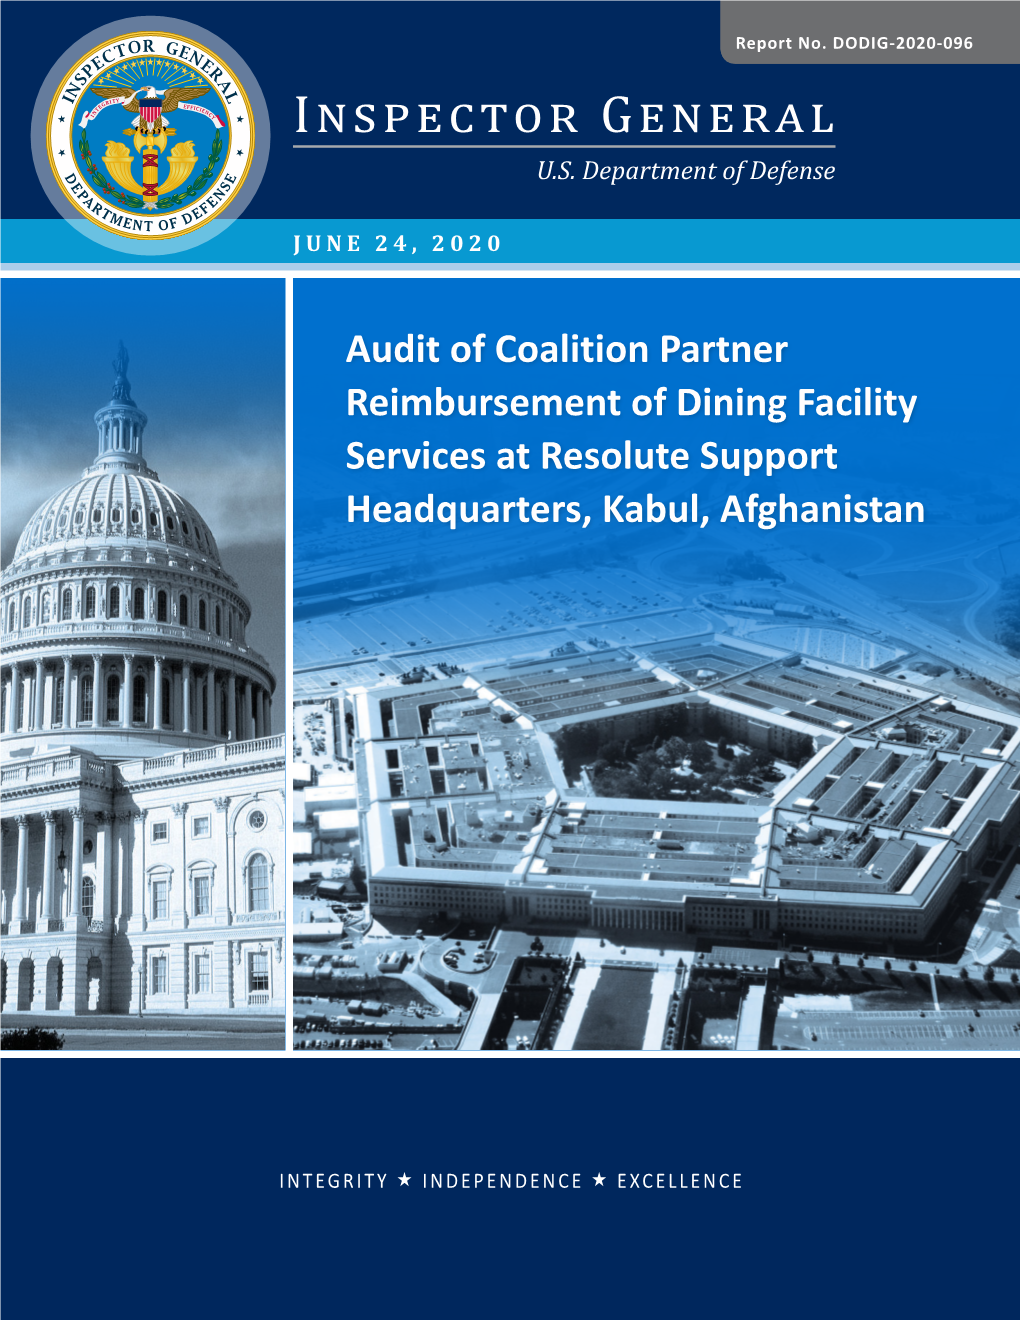 Audit of Coalition Partner Reimbursement of Dining Facility Services at Resolute Support Headquarters, Kabul, Afghanistan